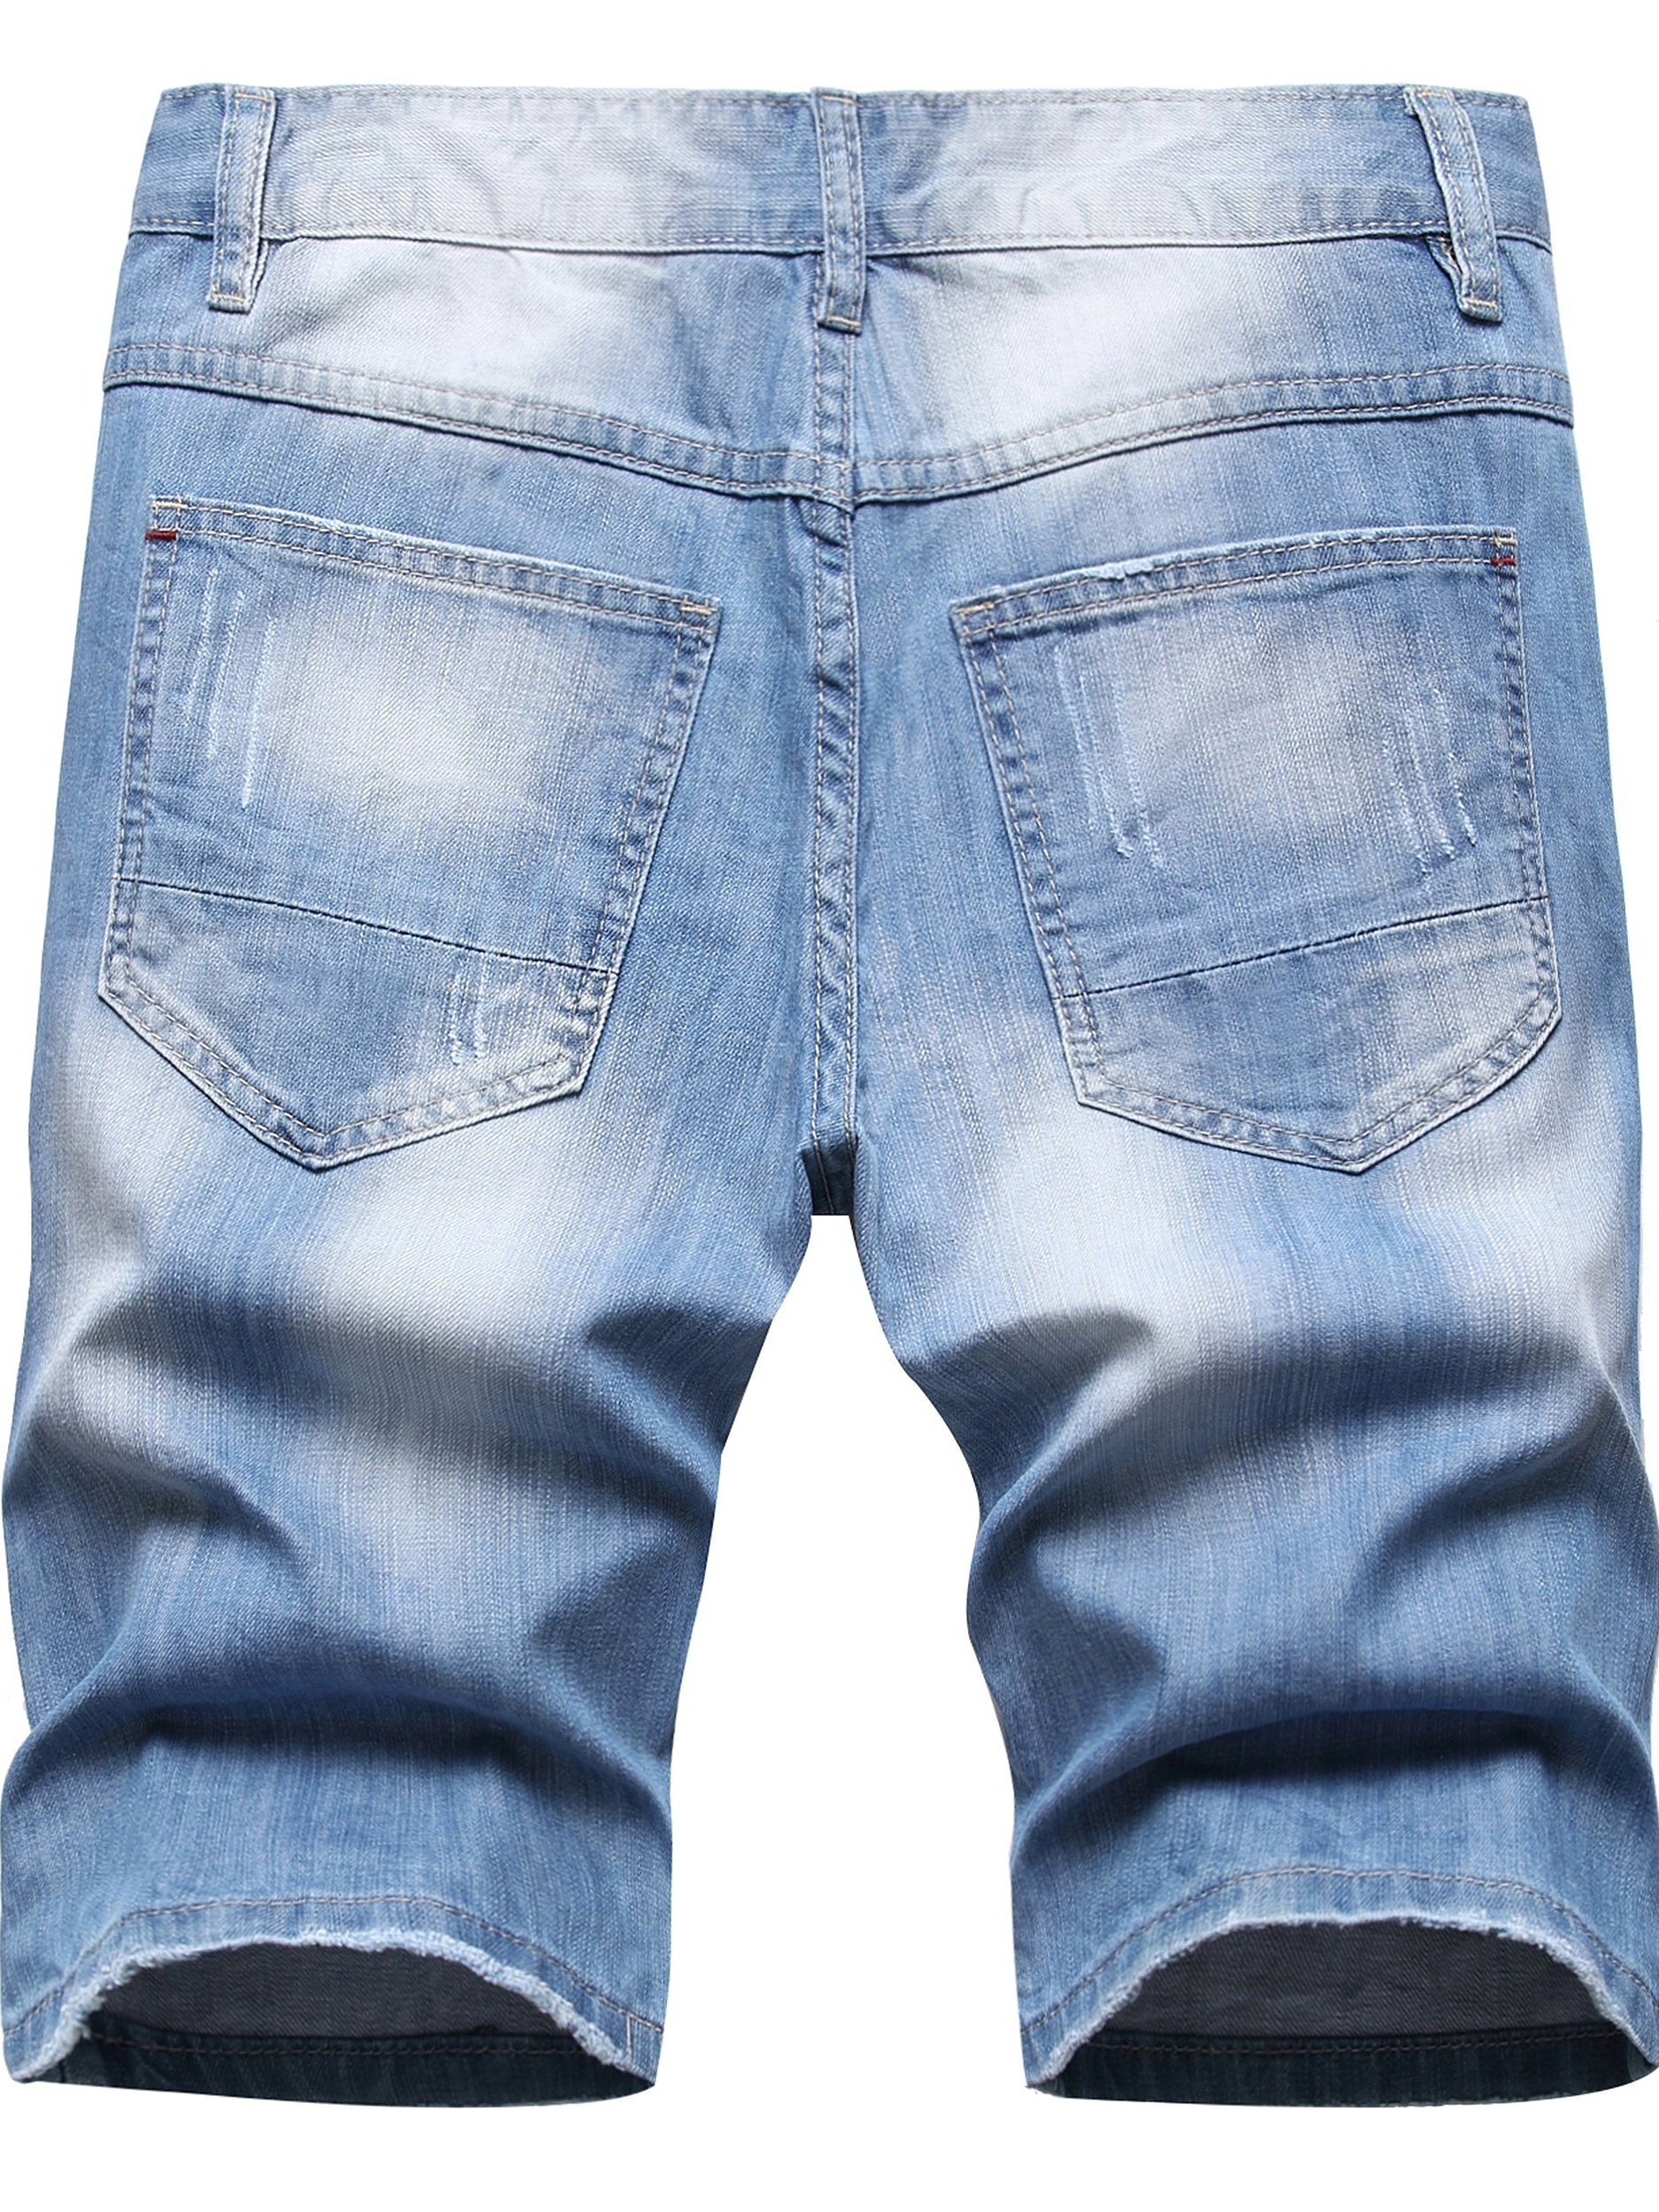 ripped denim shorts mens casual street style distressed denim shorts for summer